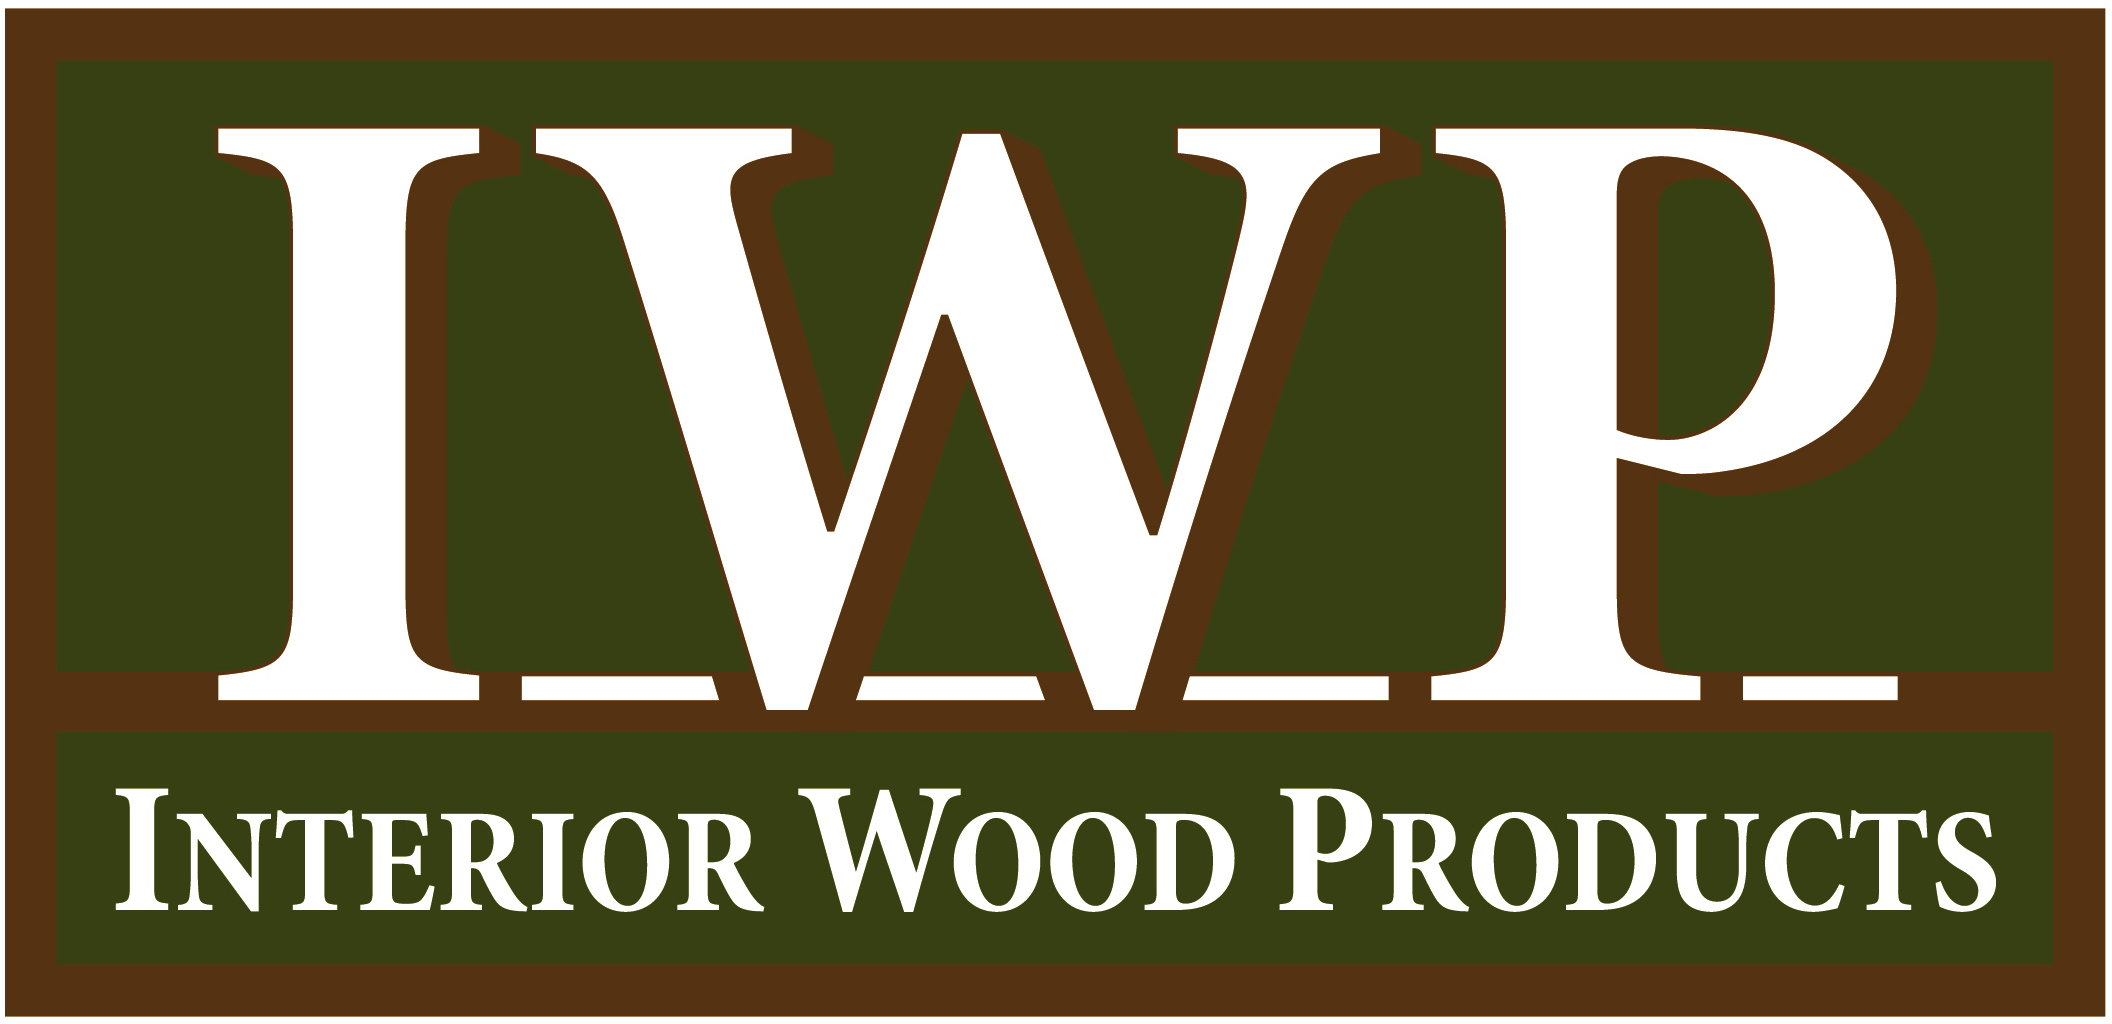 Interior Wood Products 